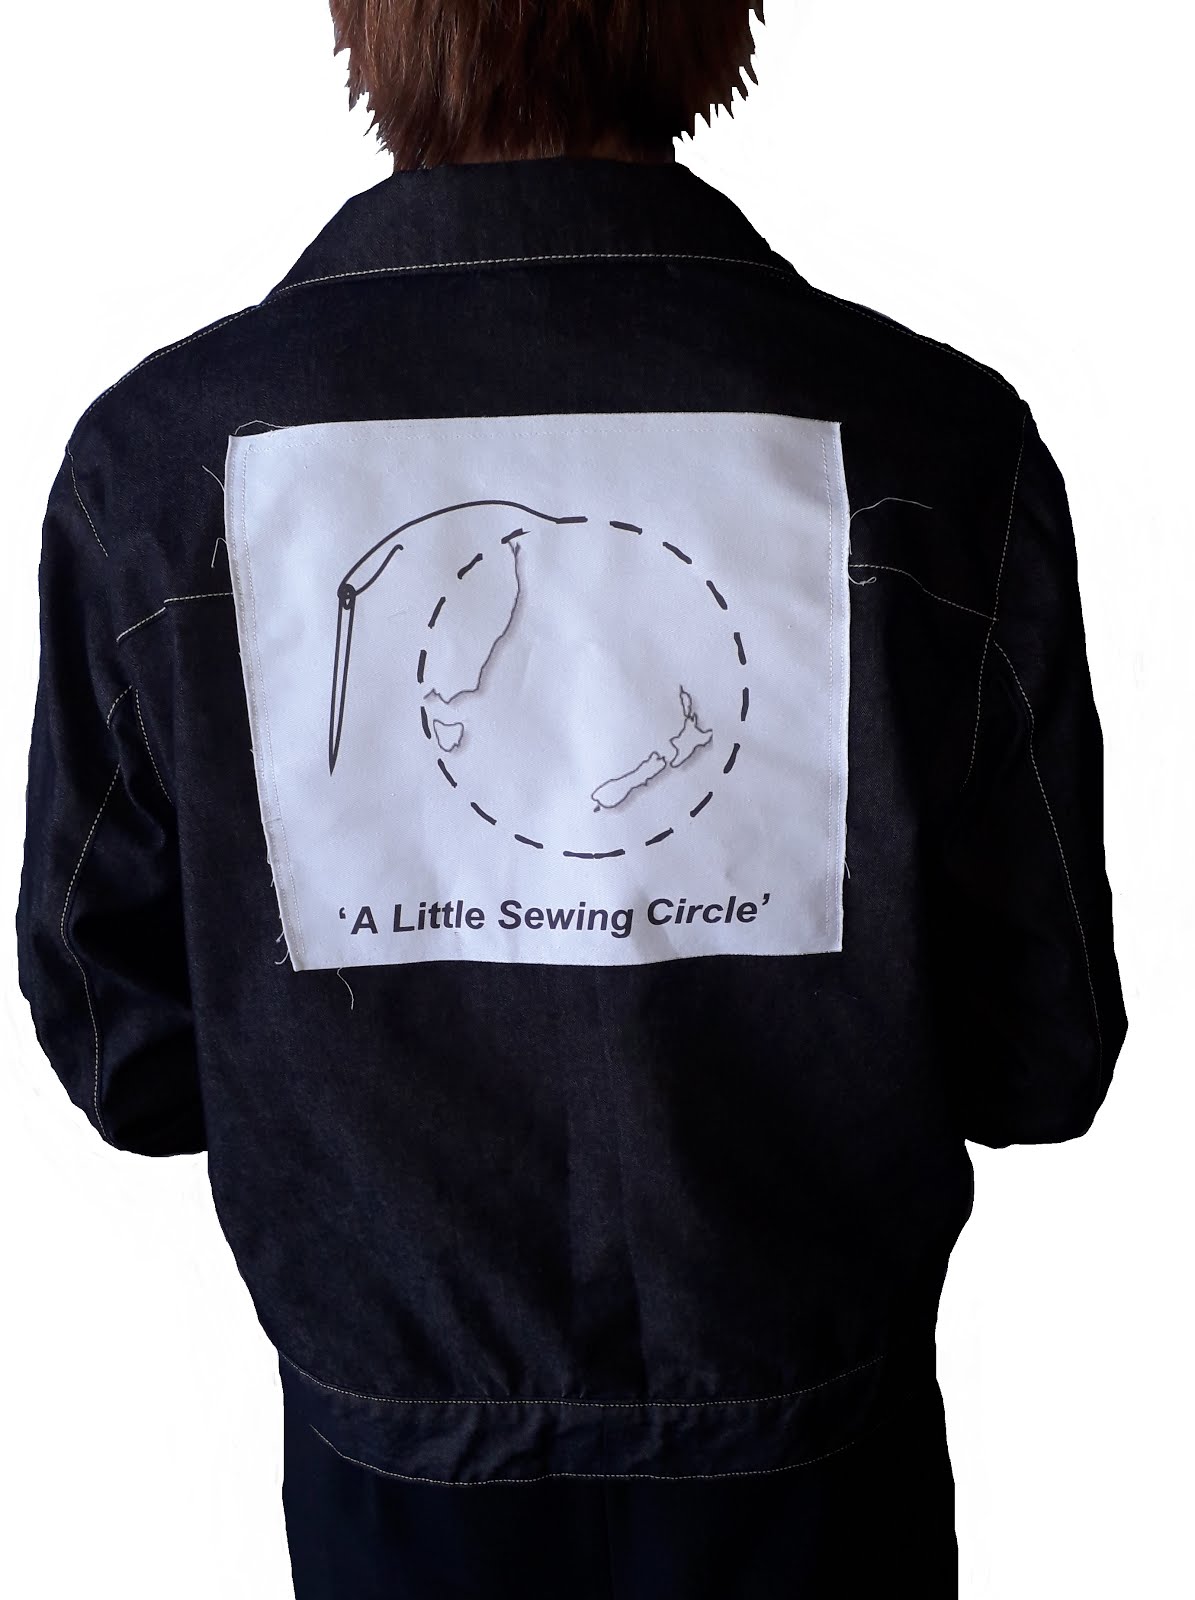 The 'A Little Sewing Circle Collective' gang patch